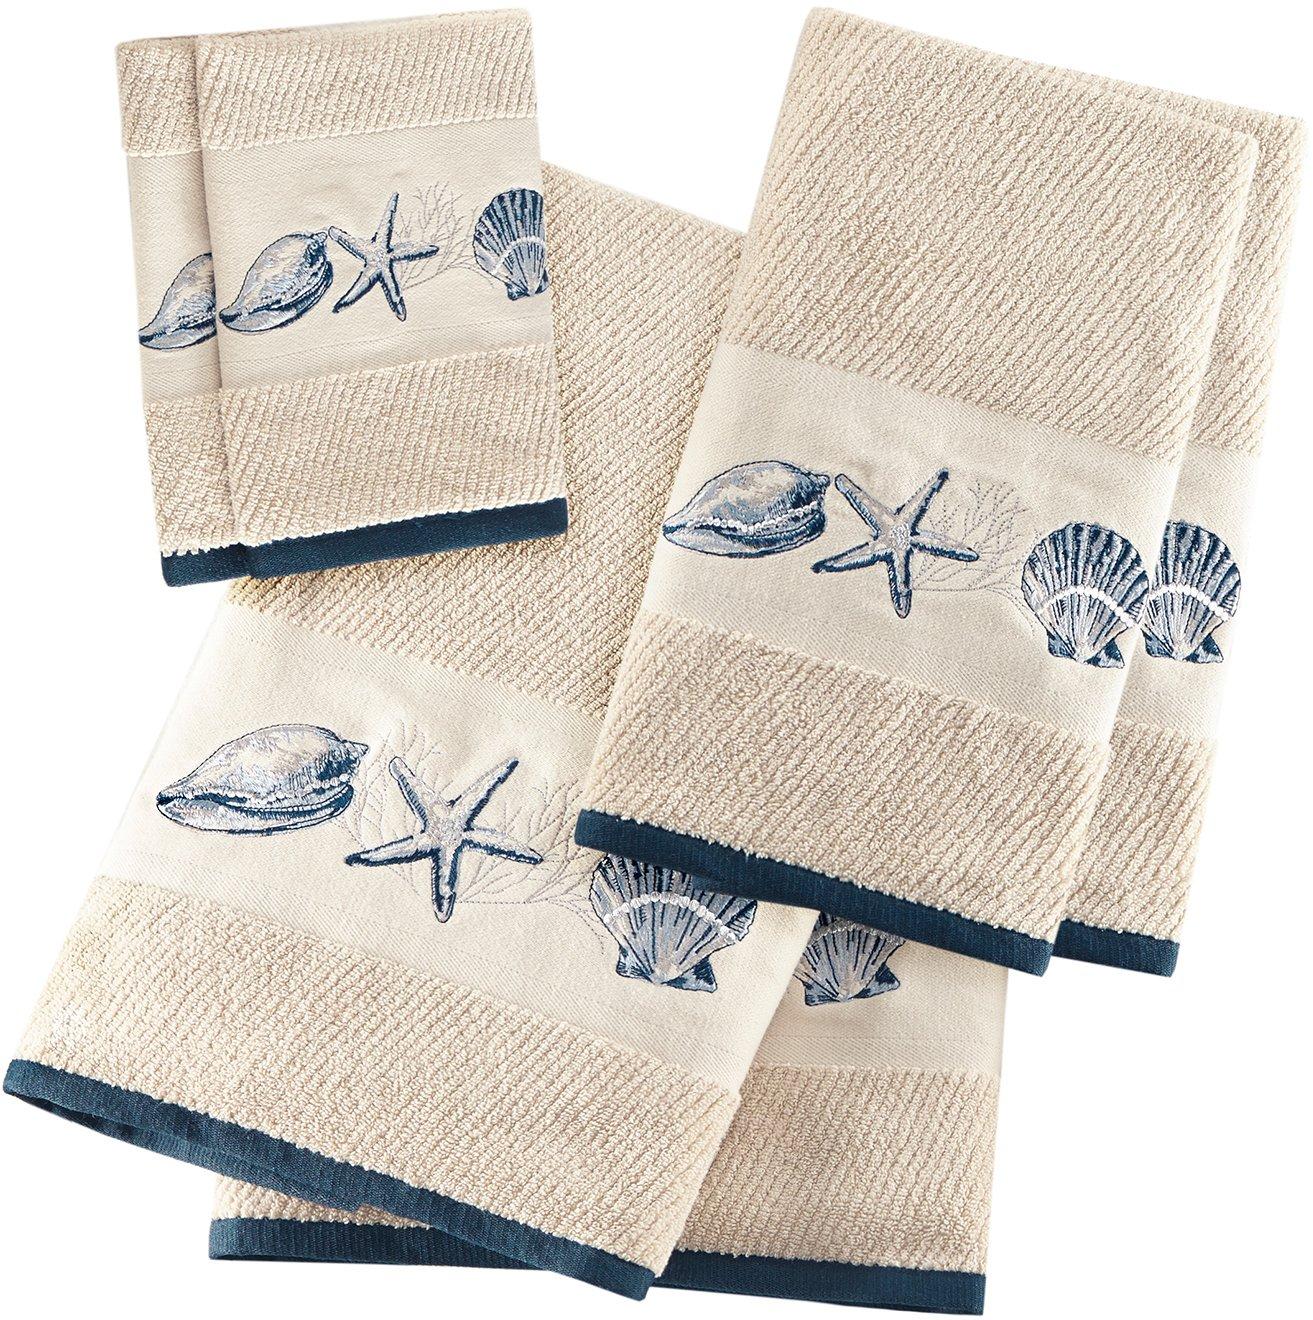 Bayside 6-pc. Embroidered Towel Set